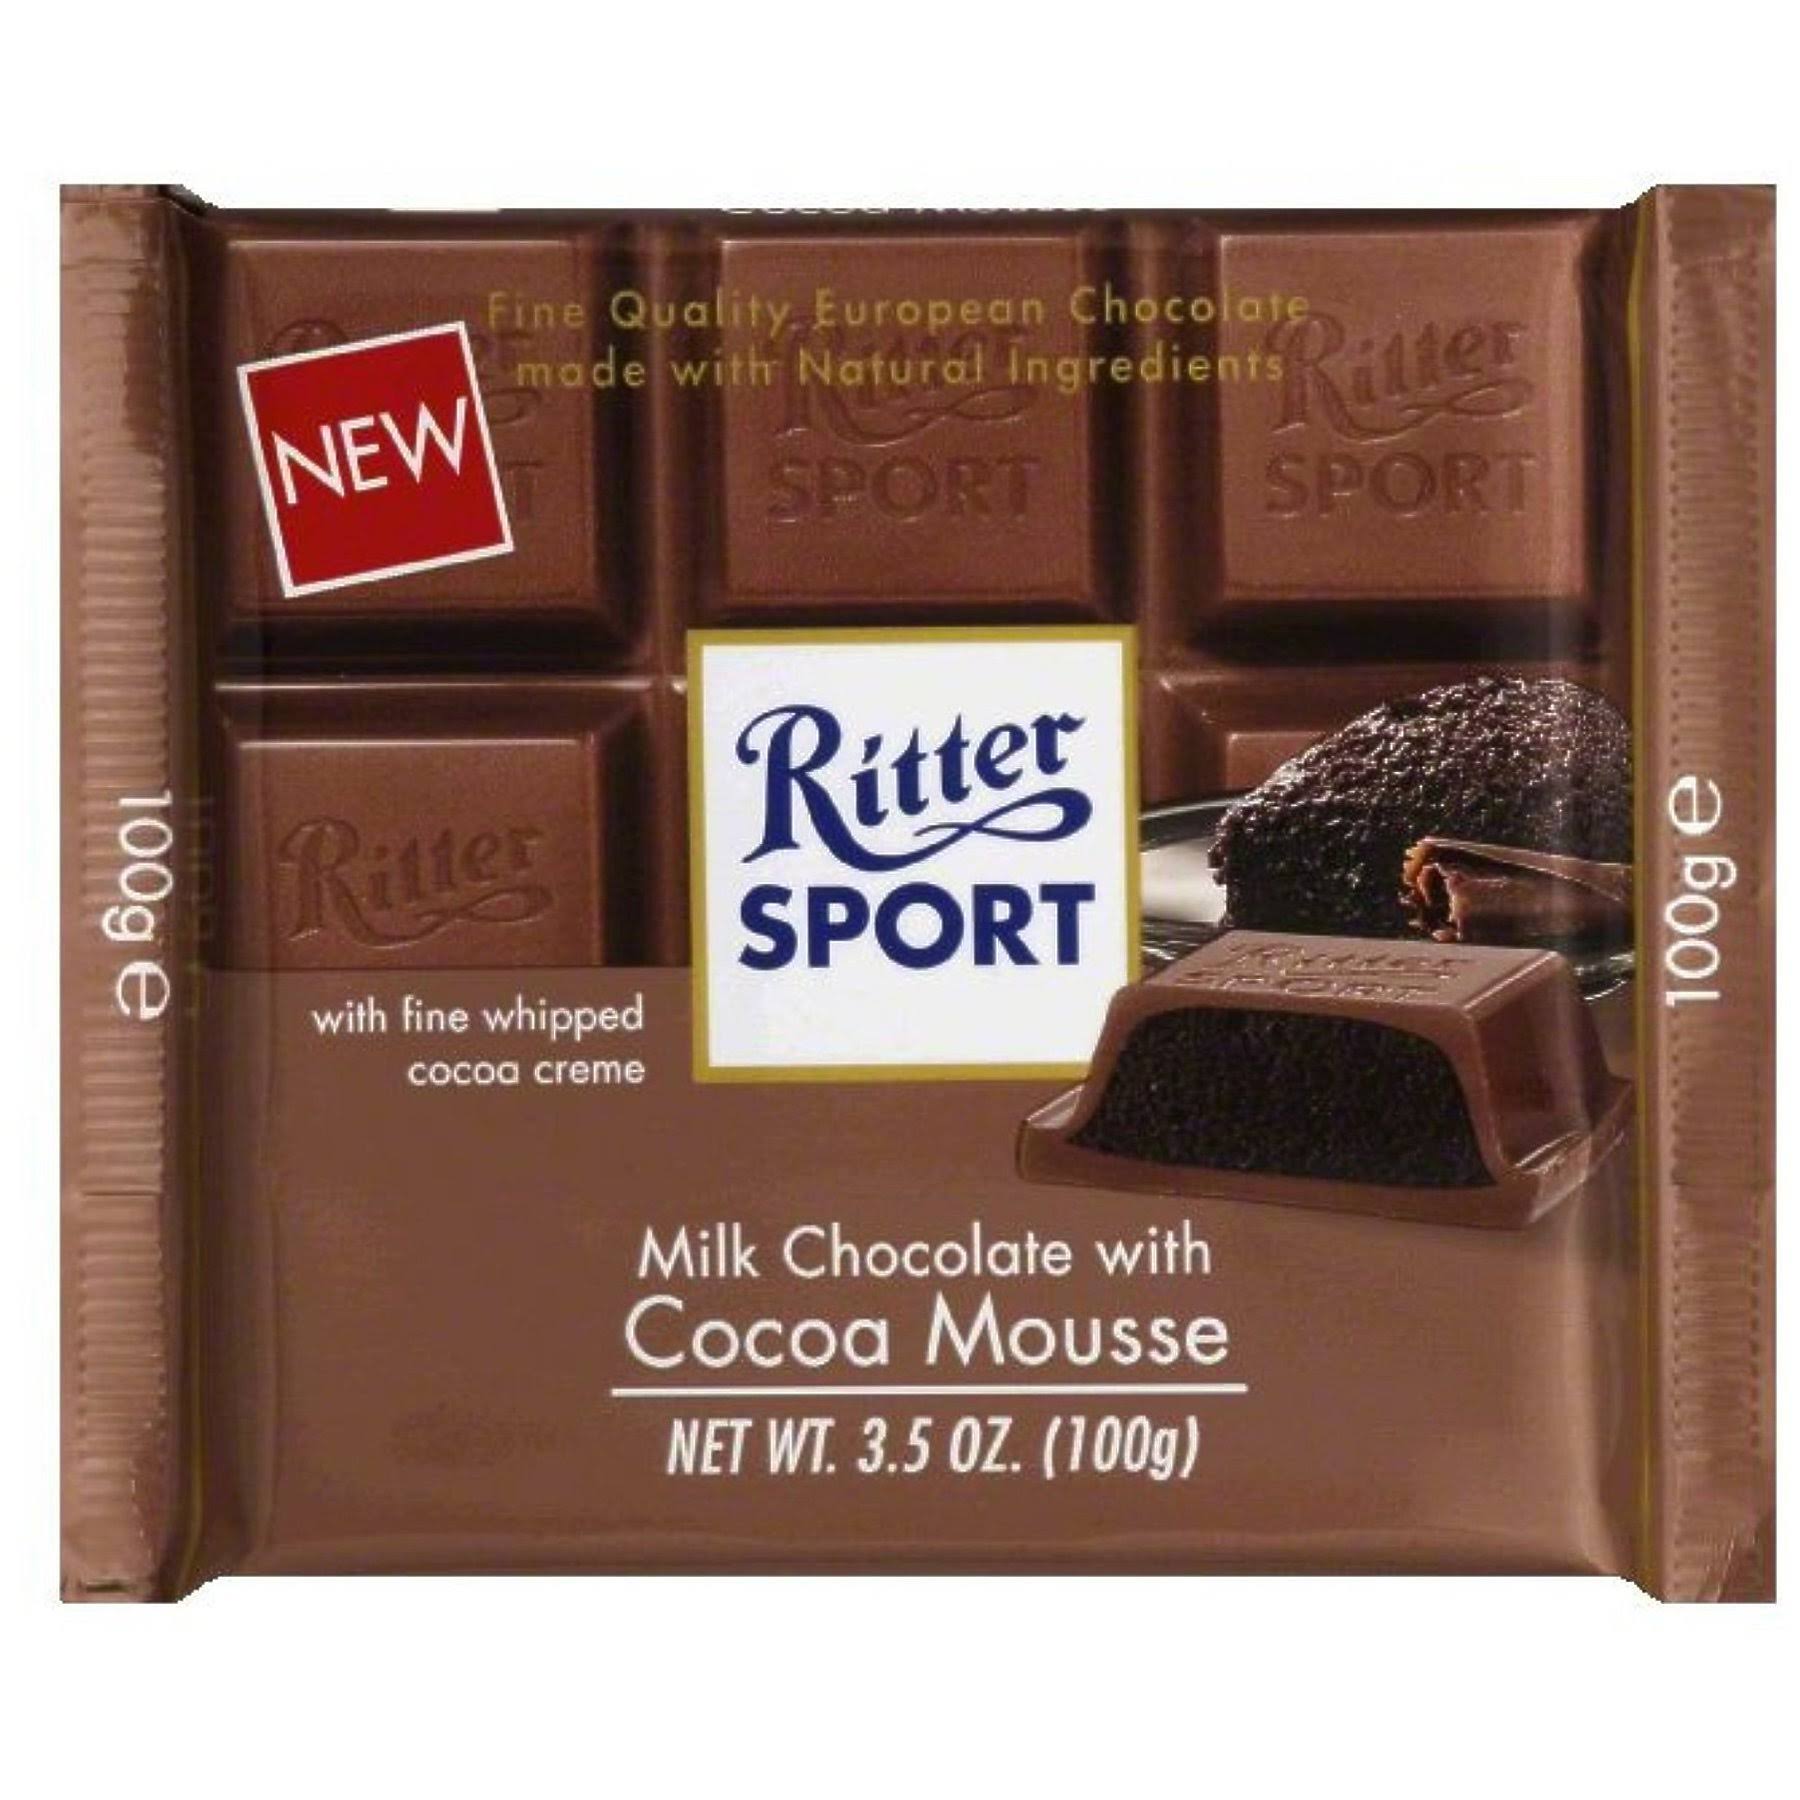 Ritter Sport Milk Chocolate Bar - Cocoa Mousse, 100g